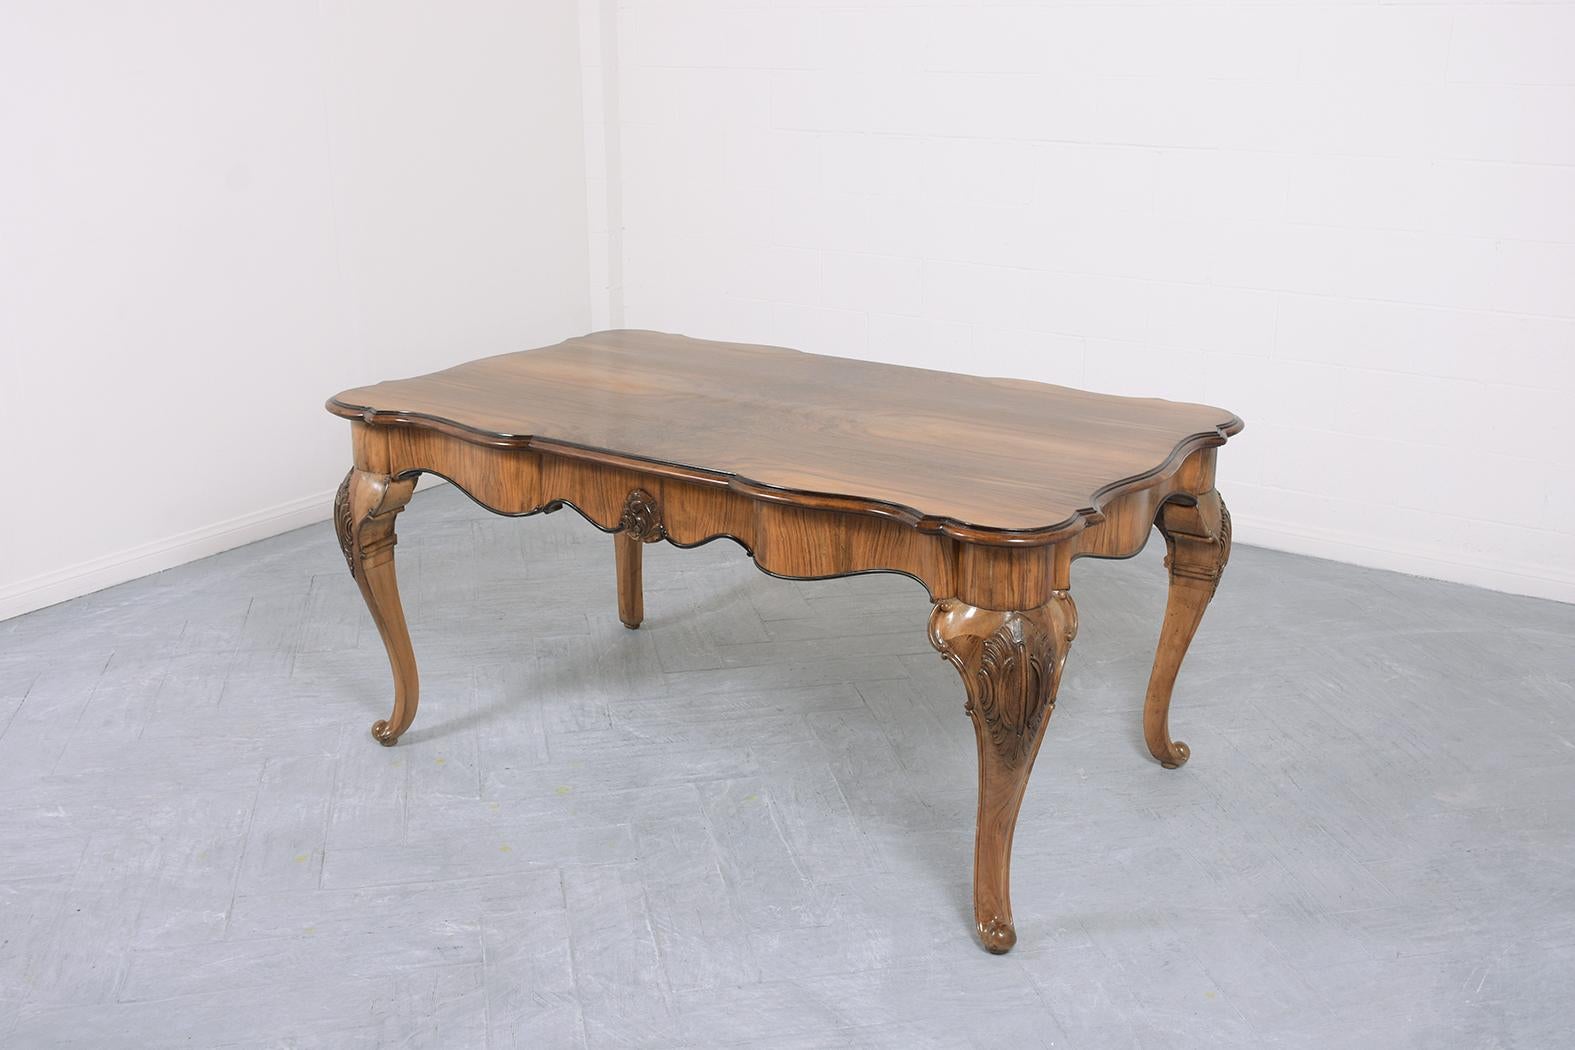 Victorian Late 19th-Century English Walnut Dining Table with Carved Cabriole Legs